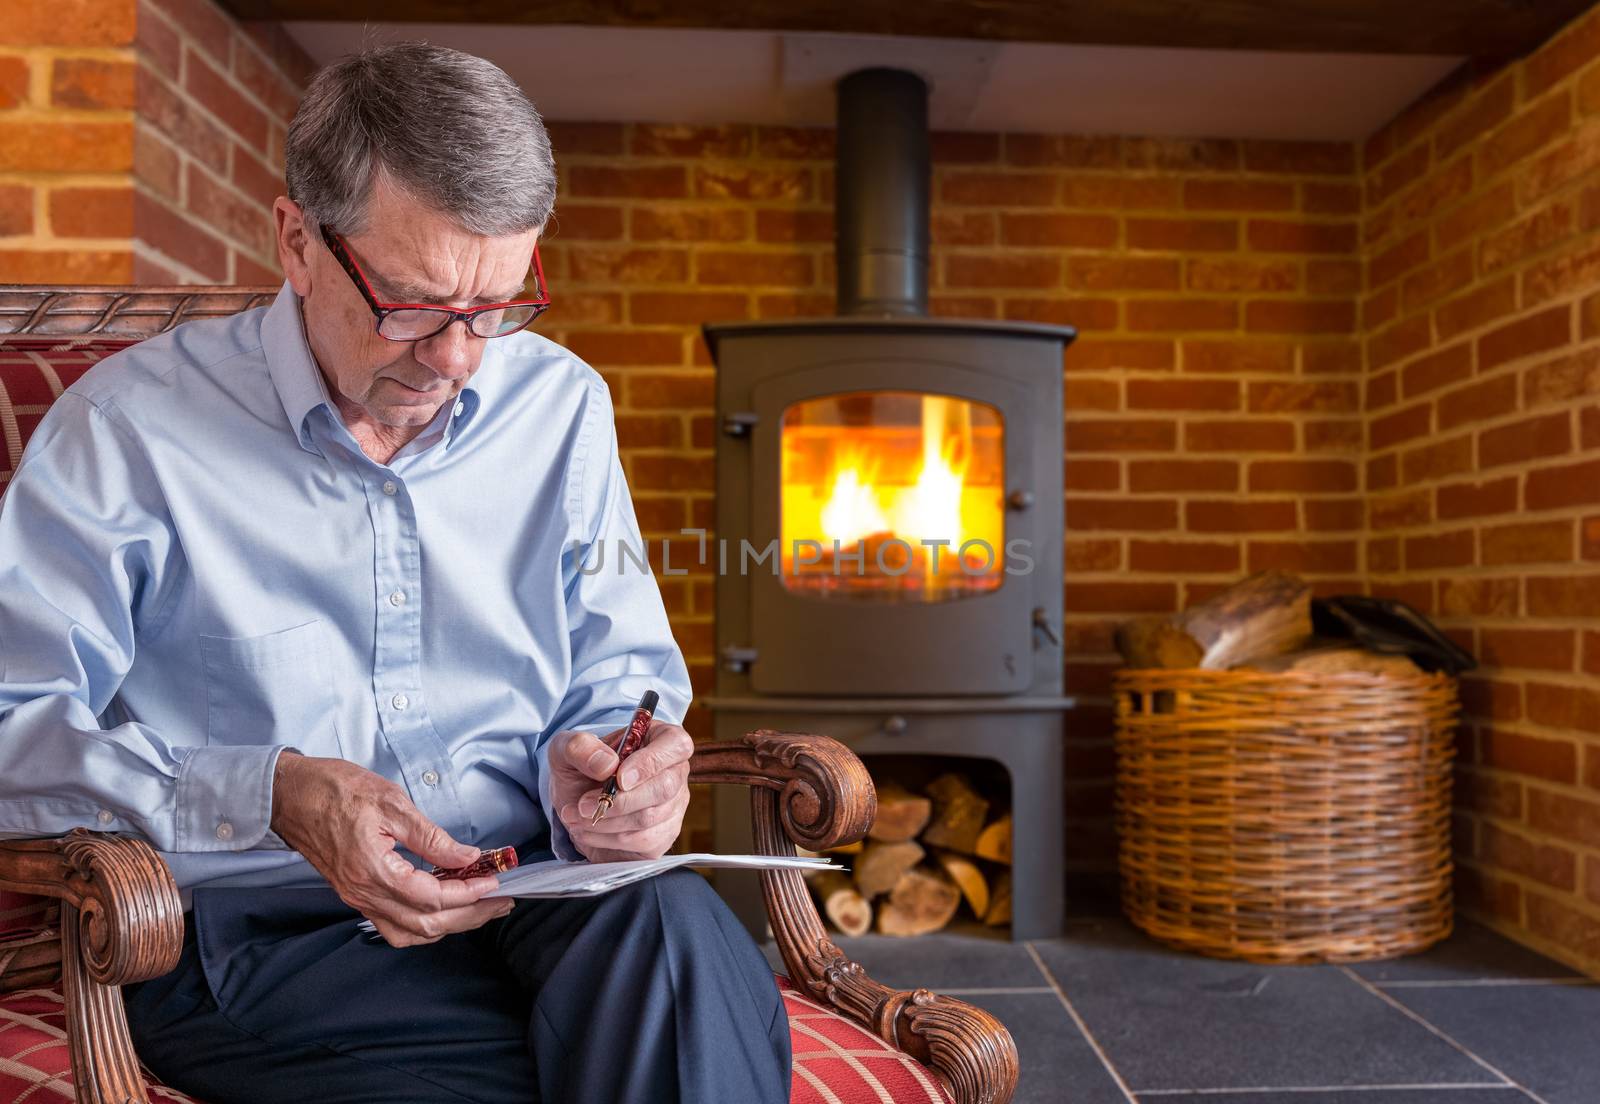 Senior man checking a document with wood fire in background by steheap